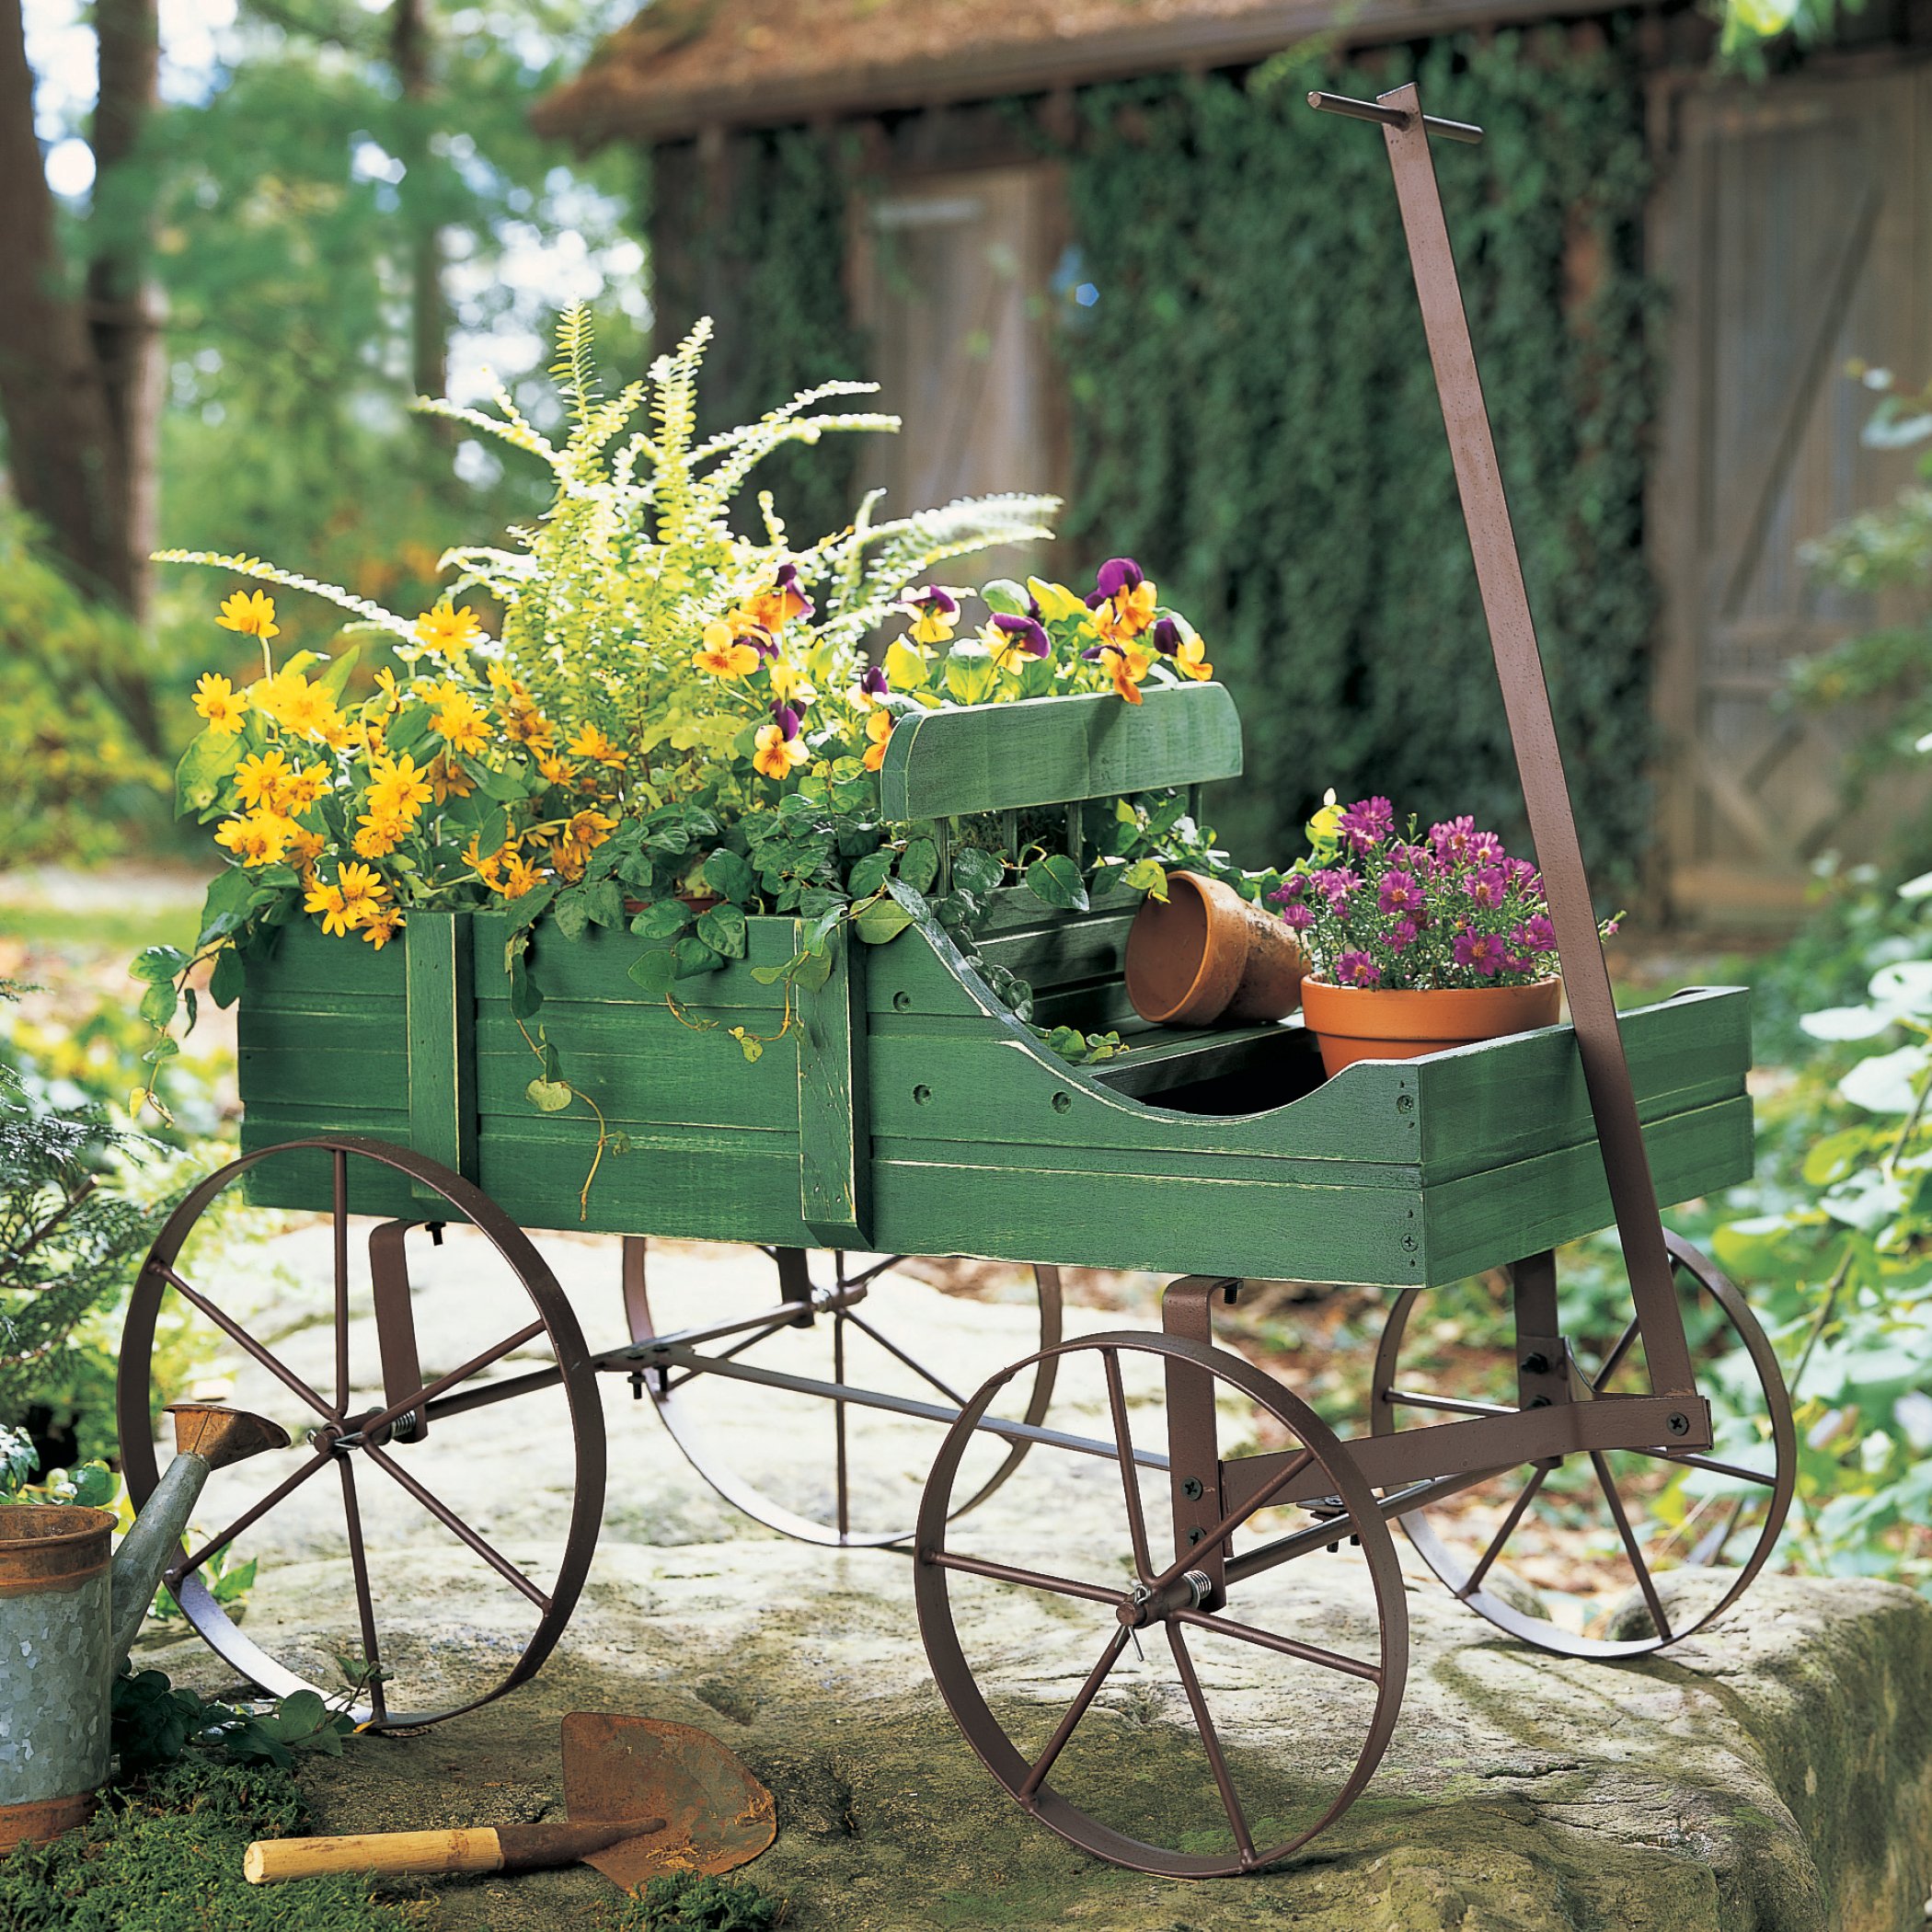 Collections Etc Amish Wagon Indoor/Outdoor Decorative Planter - Green - image 4 of 4